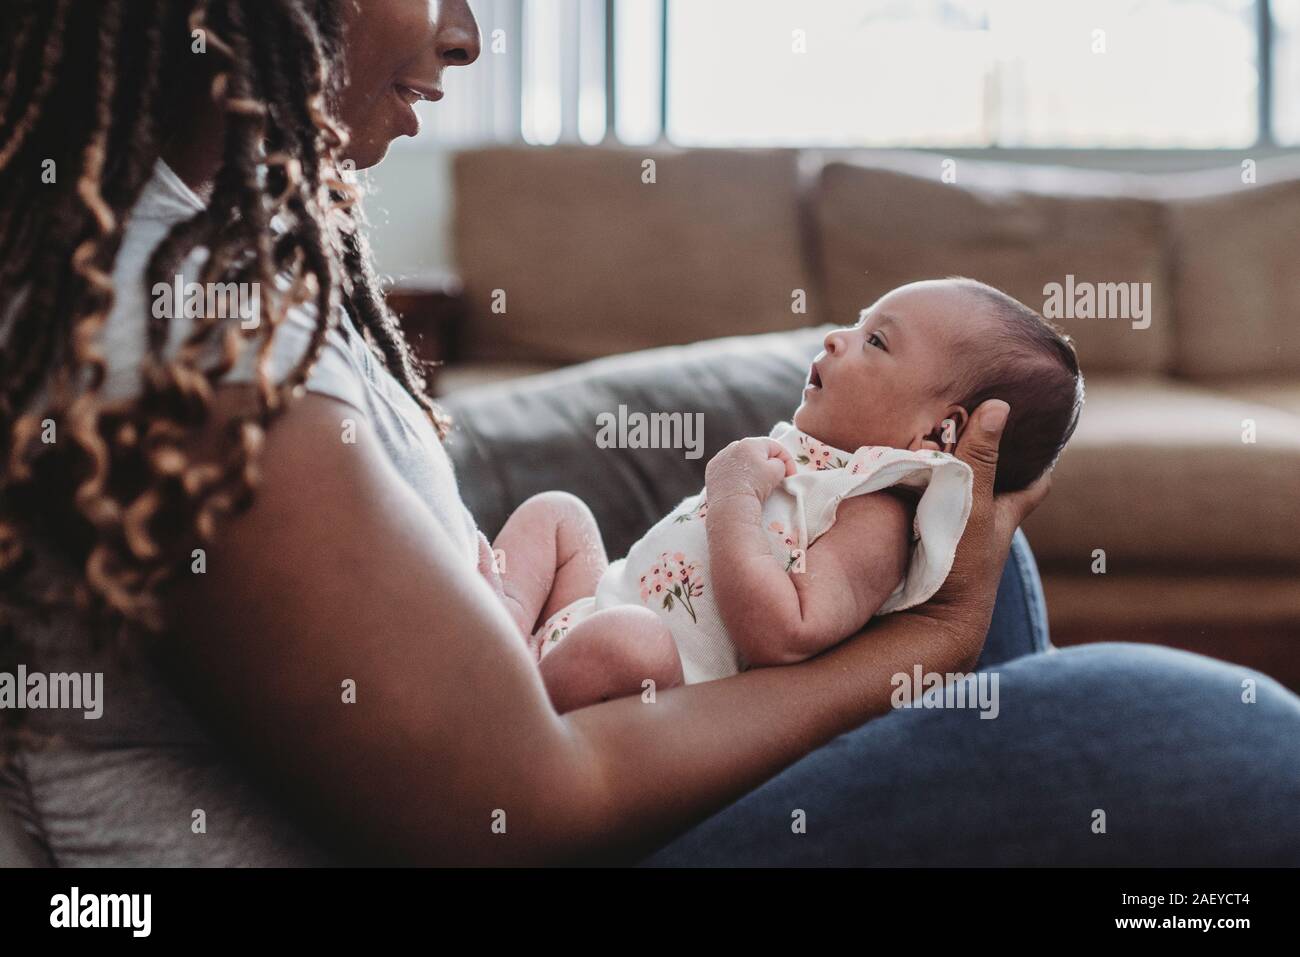 Multiracial infant held in the lap of ethnic mom with long braids Stock Photo